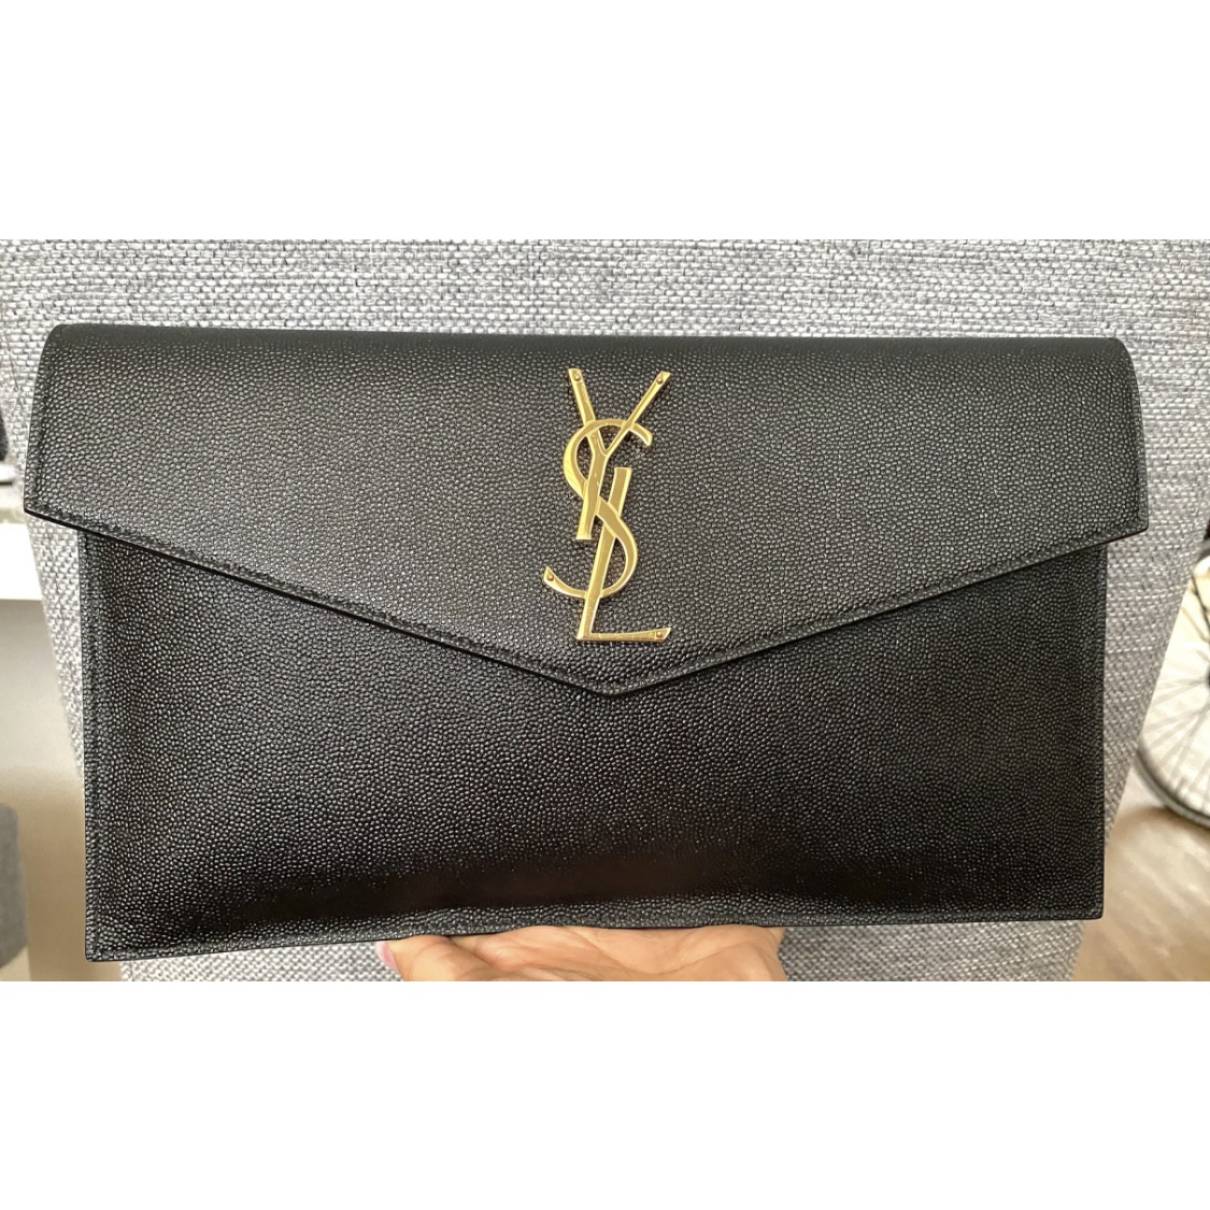 Uptown leather clutch bag Saint Laurent Black in Leather - 37341730